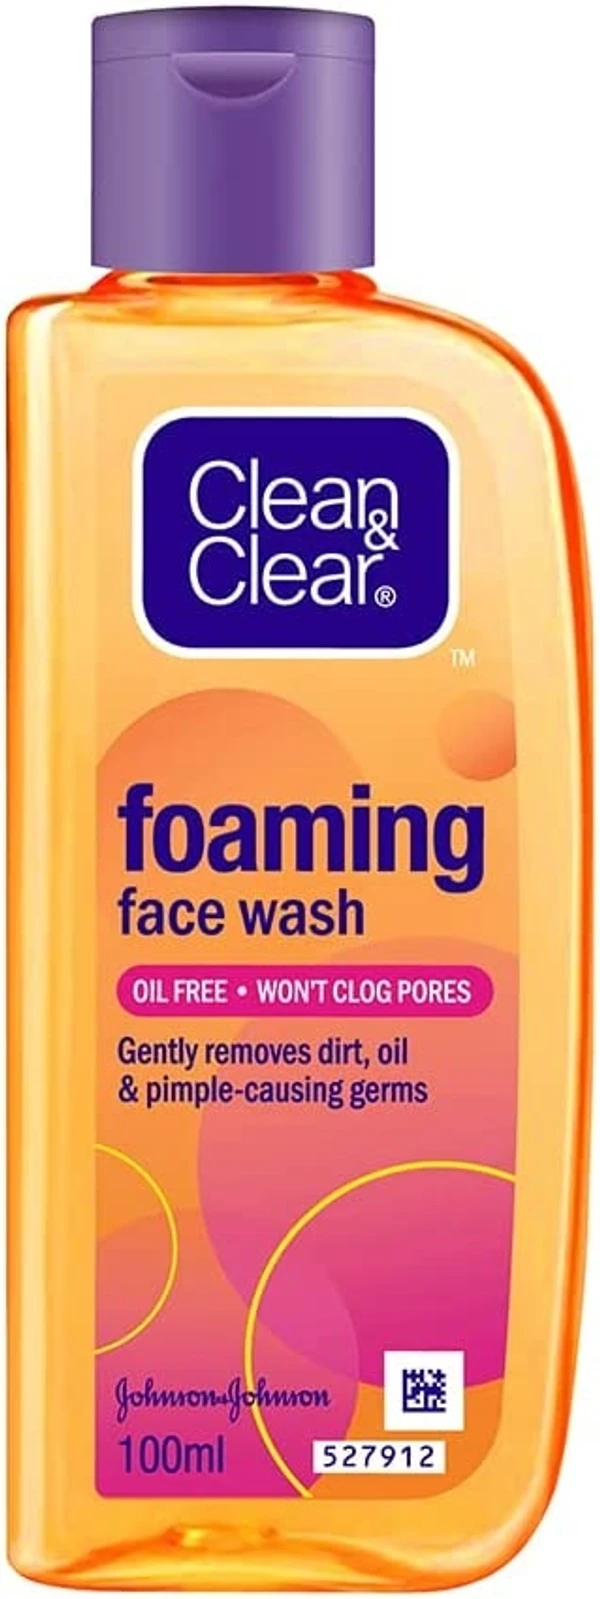 Clean & Clear Fomaing face wash 100ml